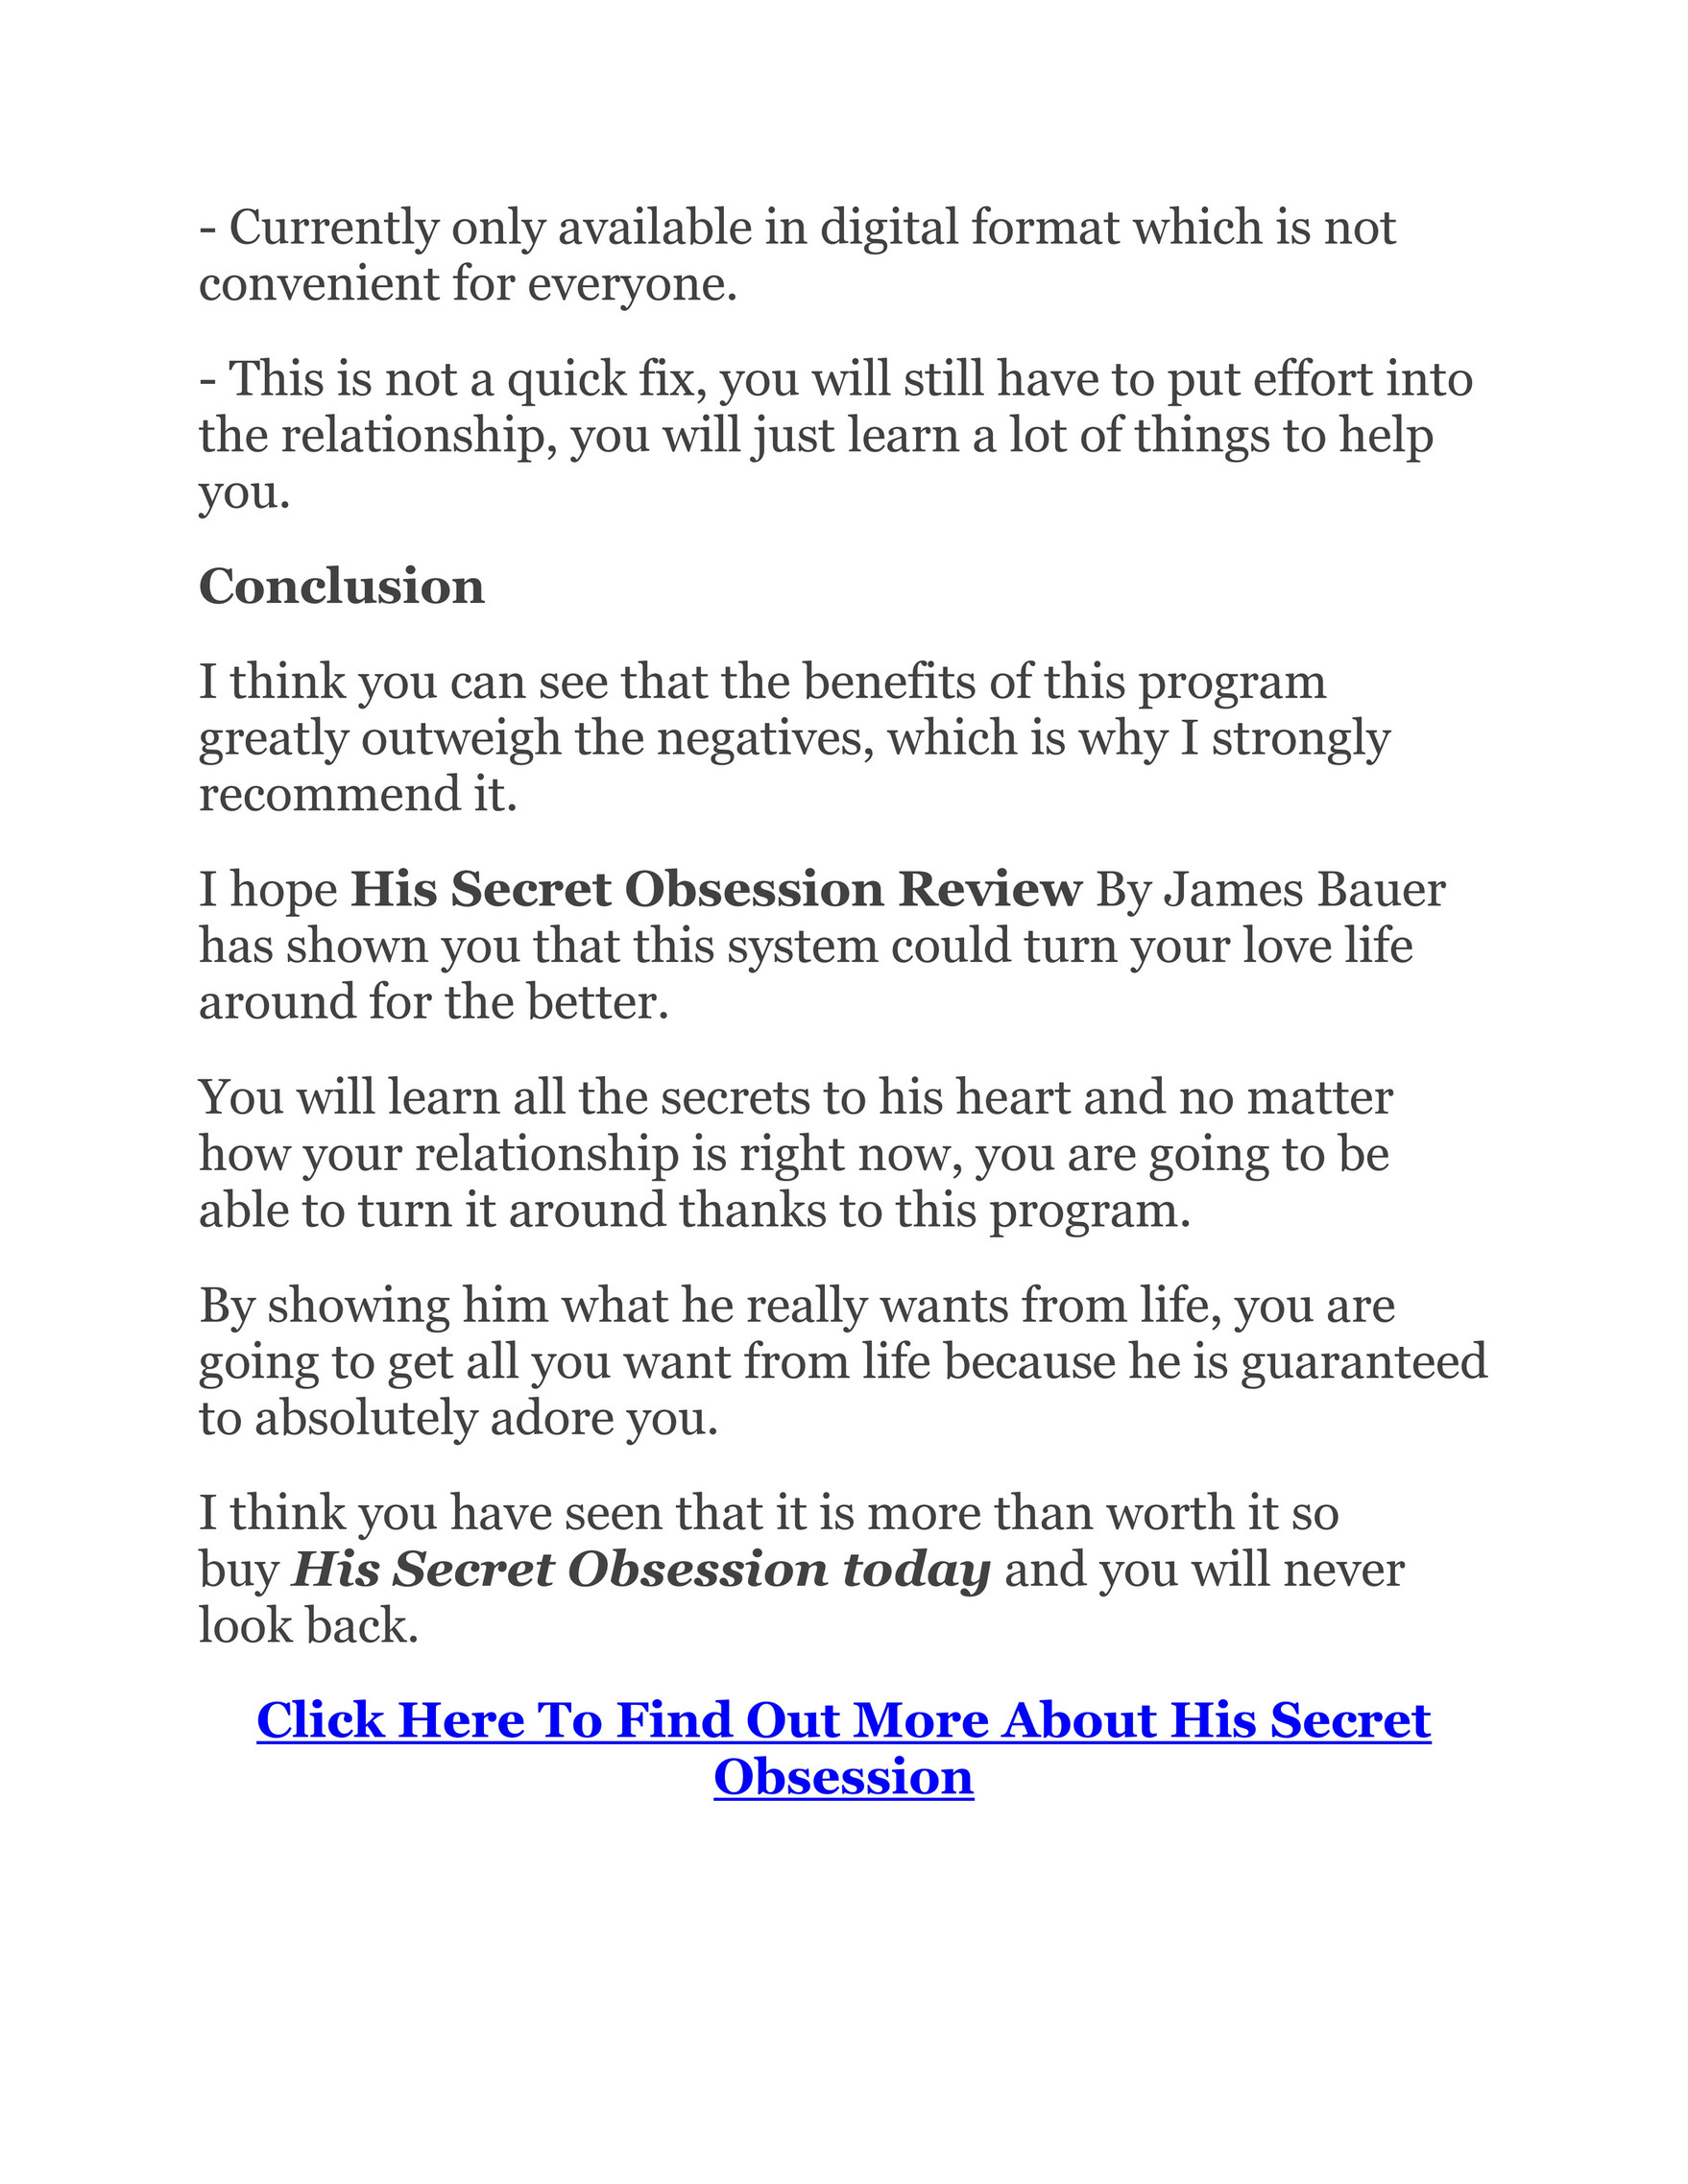 Stop Wasting Time And Start His Secret Obsession Review